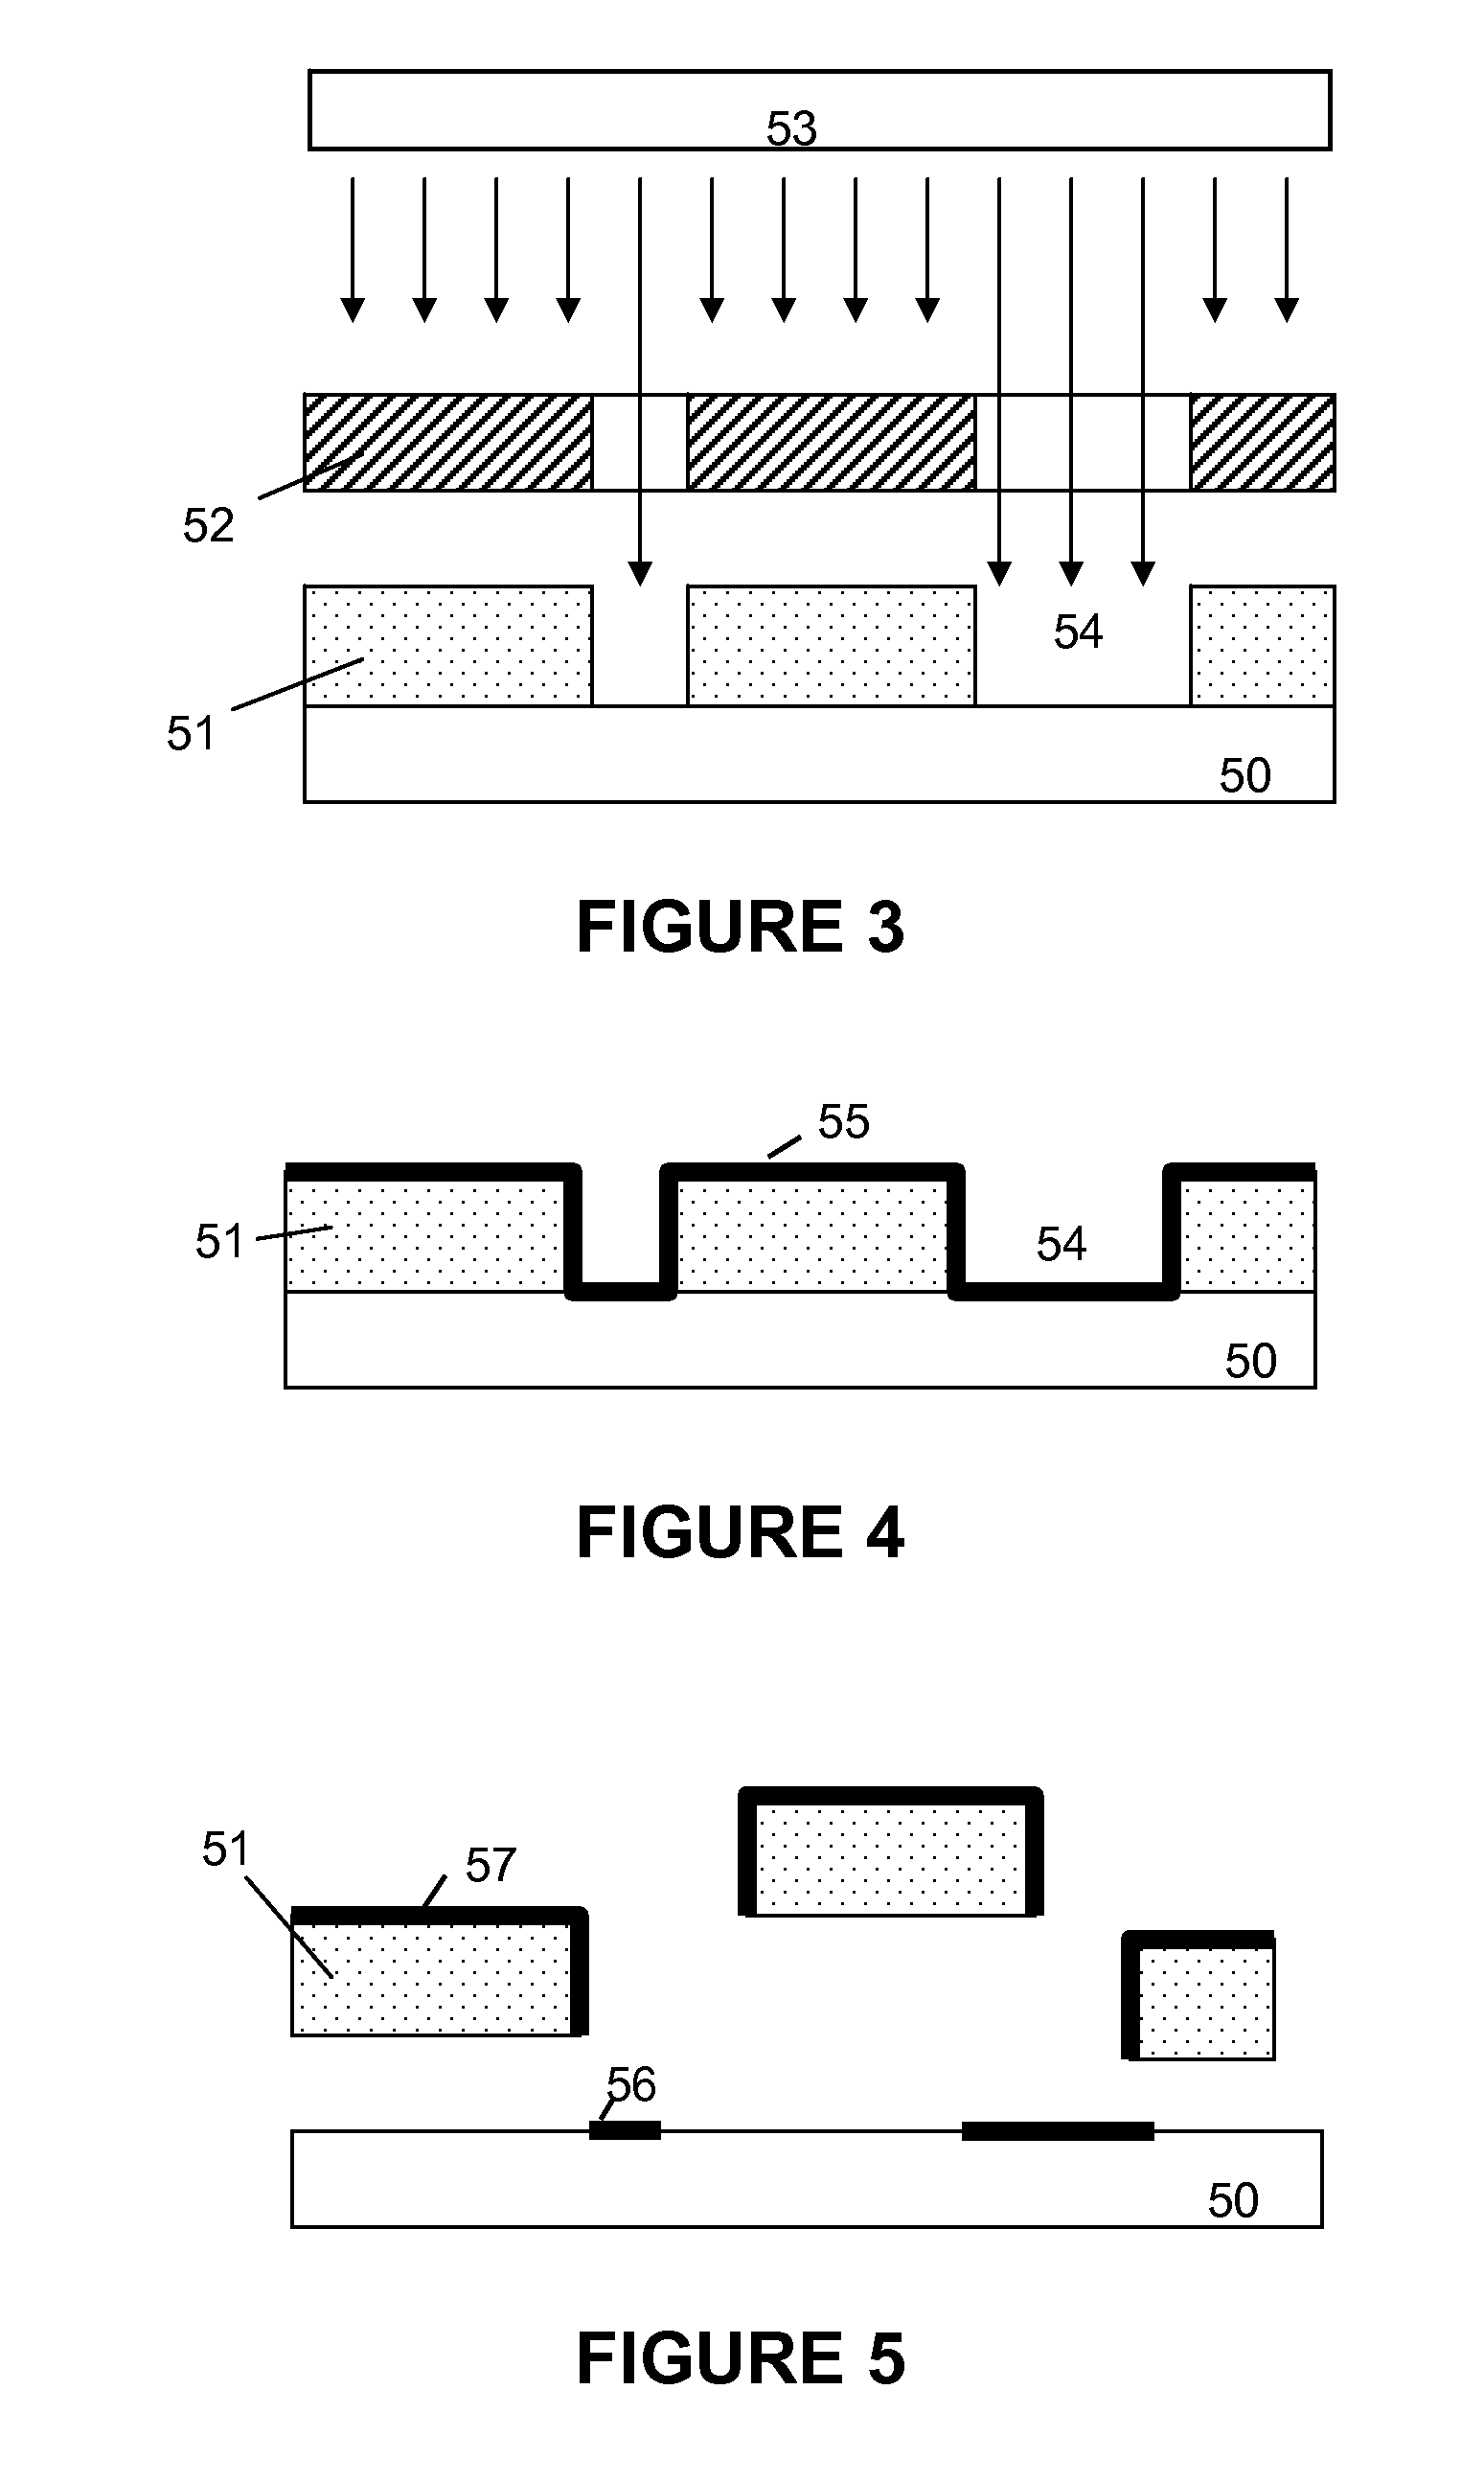 High throughput, low cost dual-mode patterning method for large area substrates